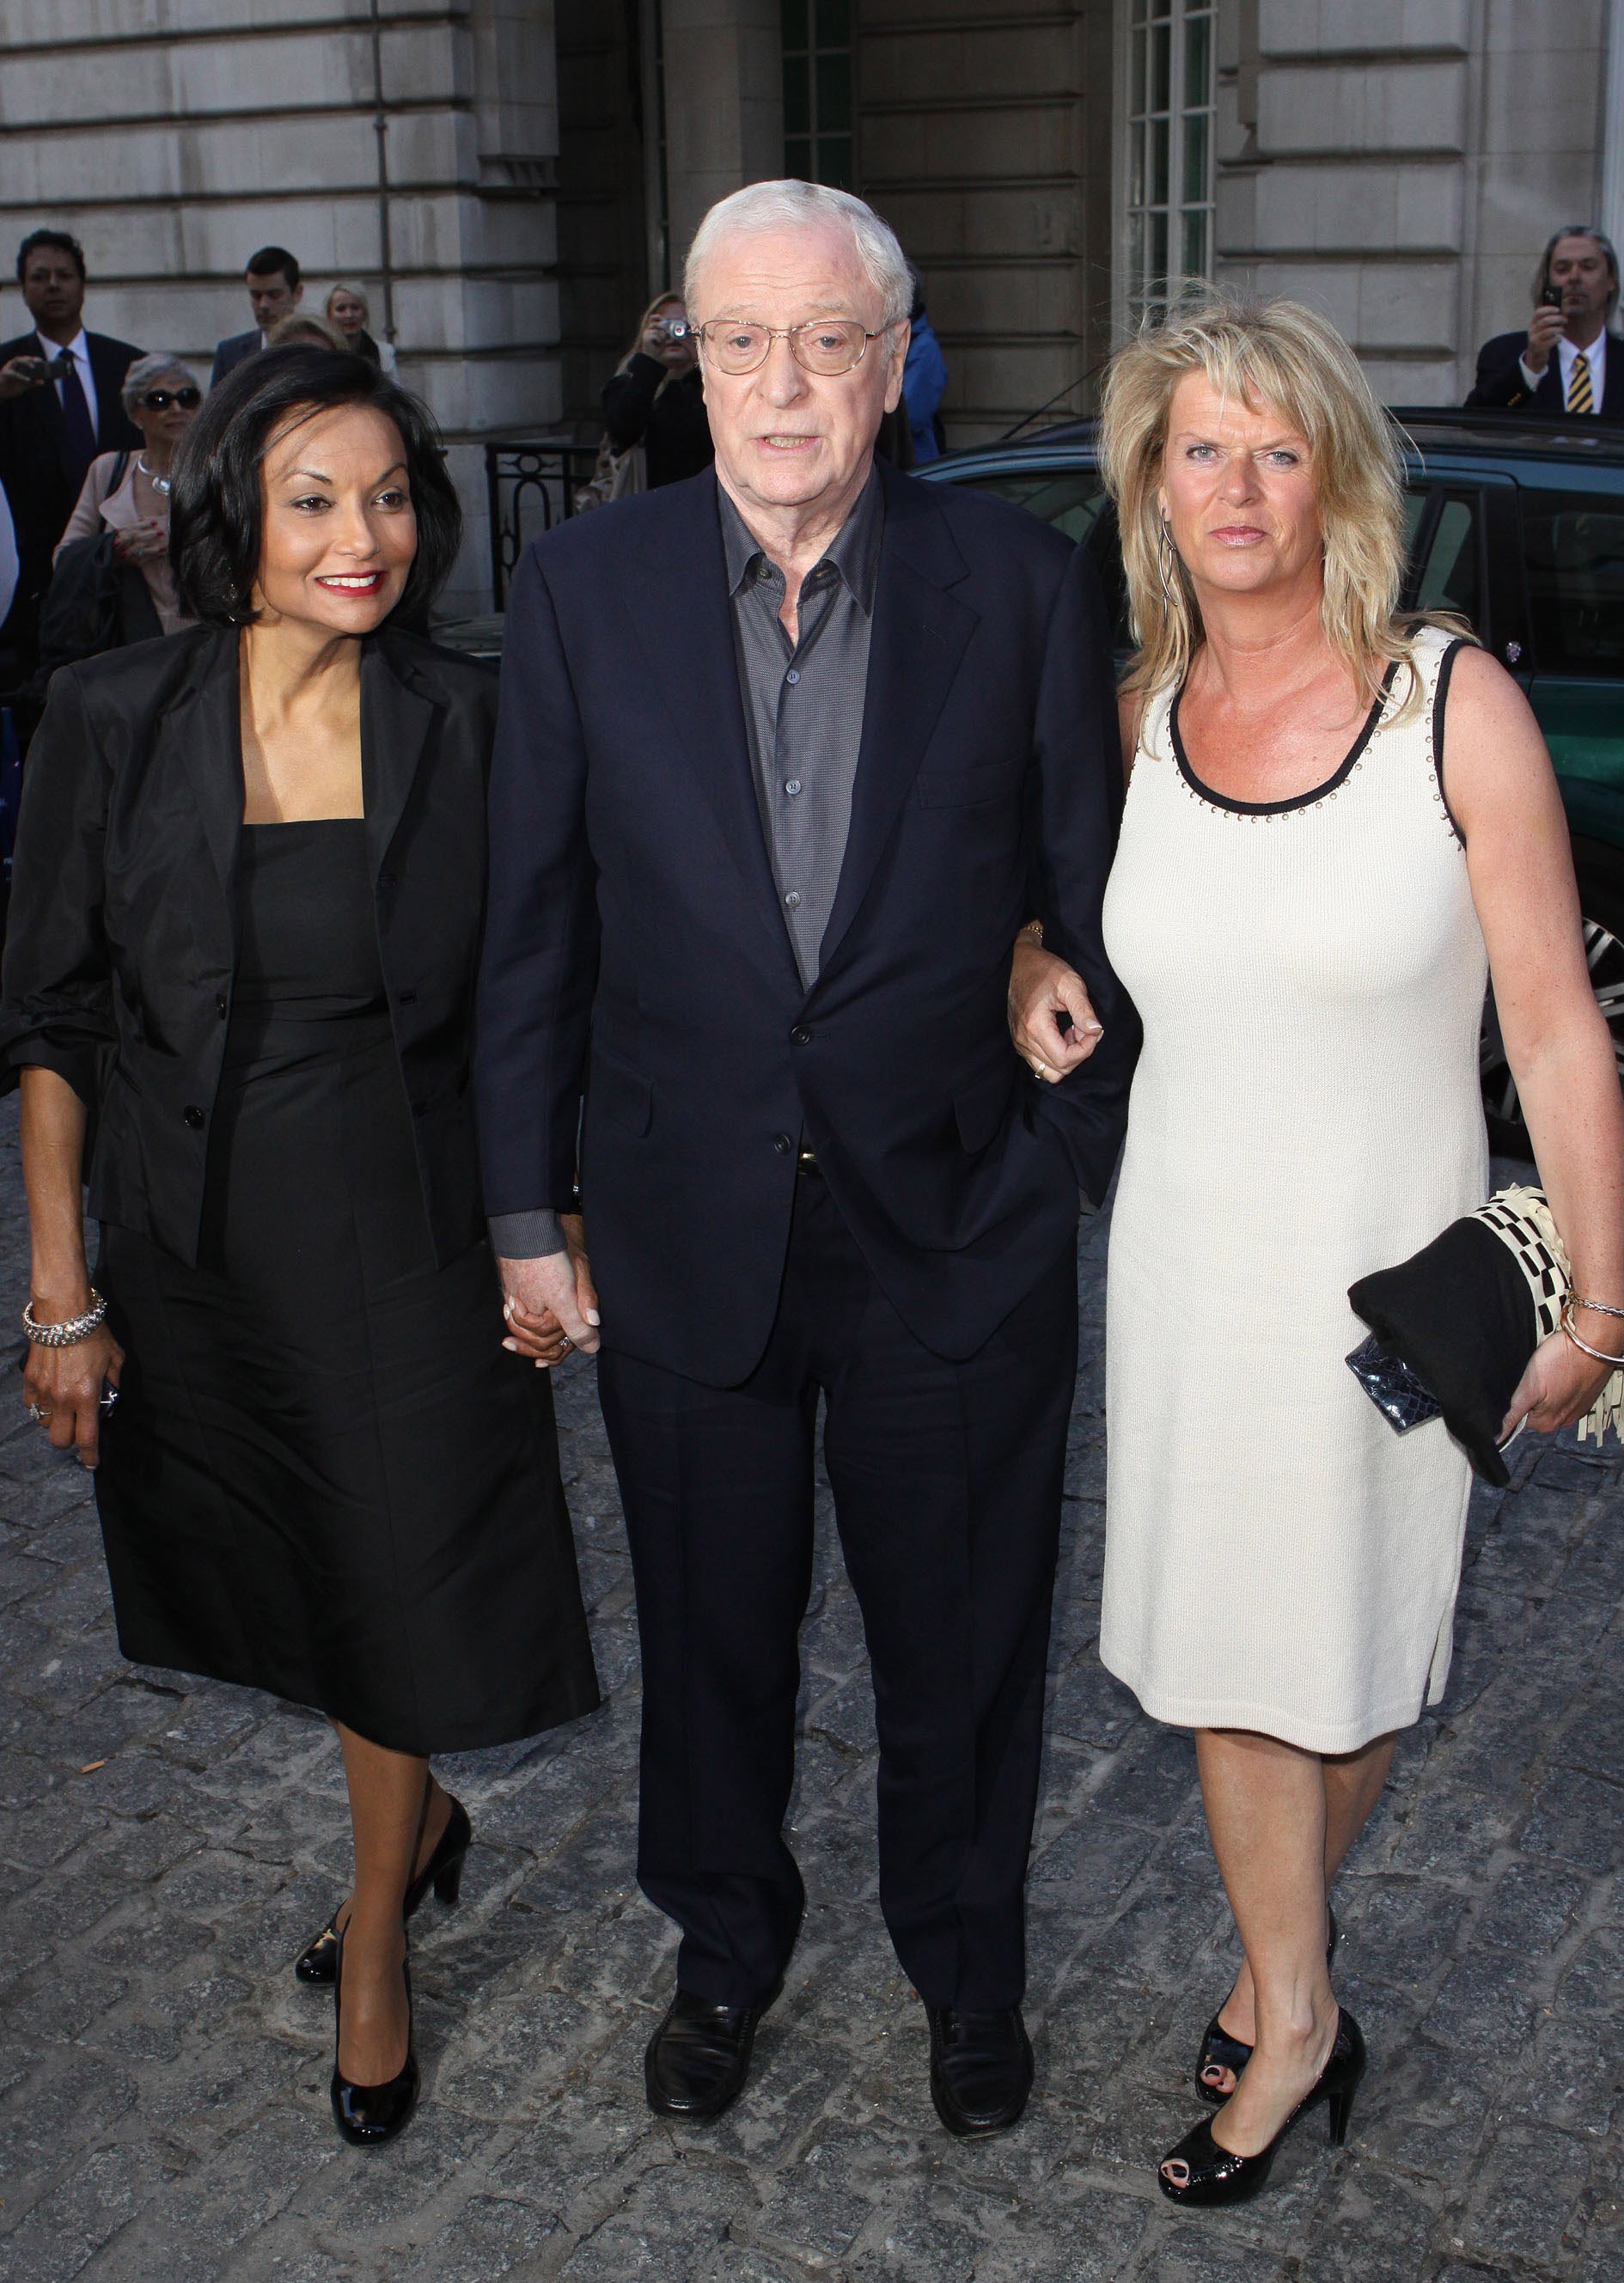 Michael Caine and Shakira Caine with daughter Dominique arriving at the London film premiere of "Is Anybody There?" at Curzon Mayfair on April 29, 2009 in London. / Source: Getty Images